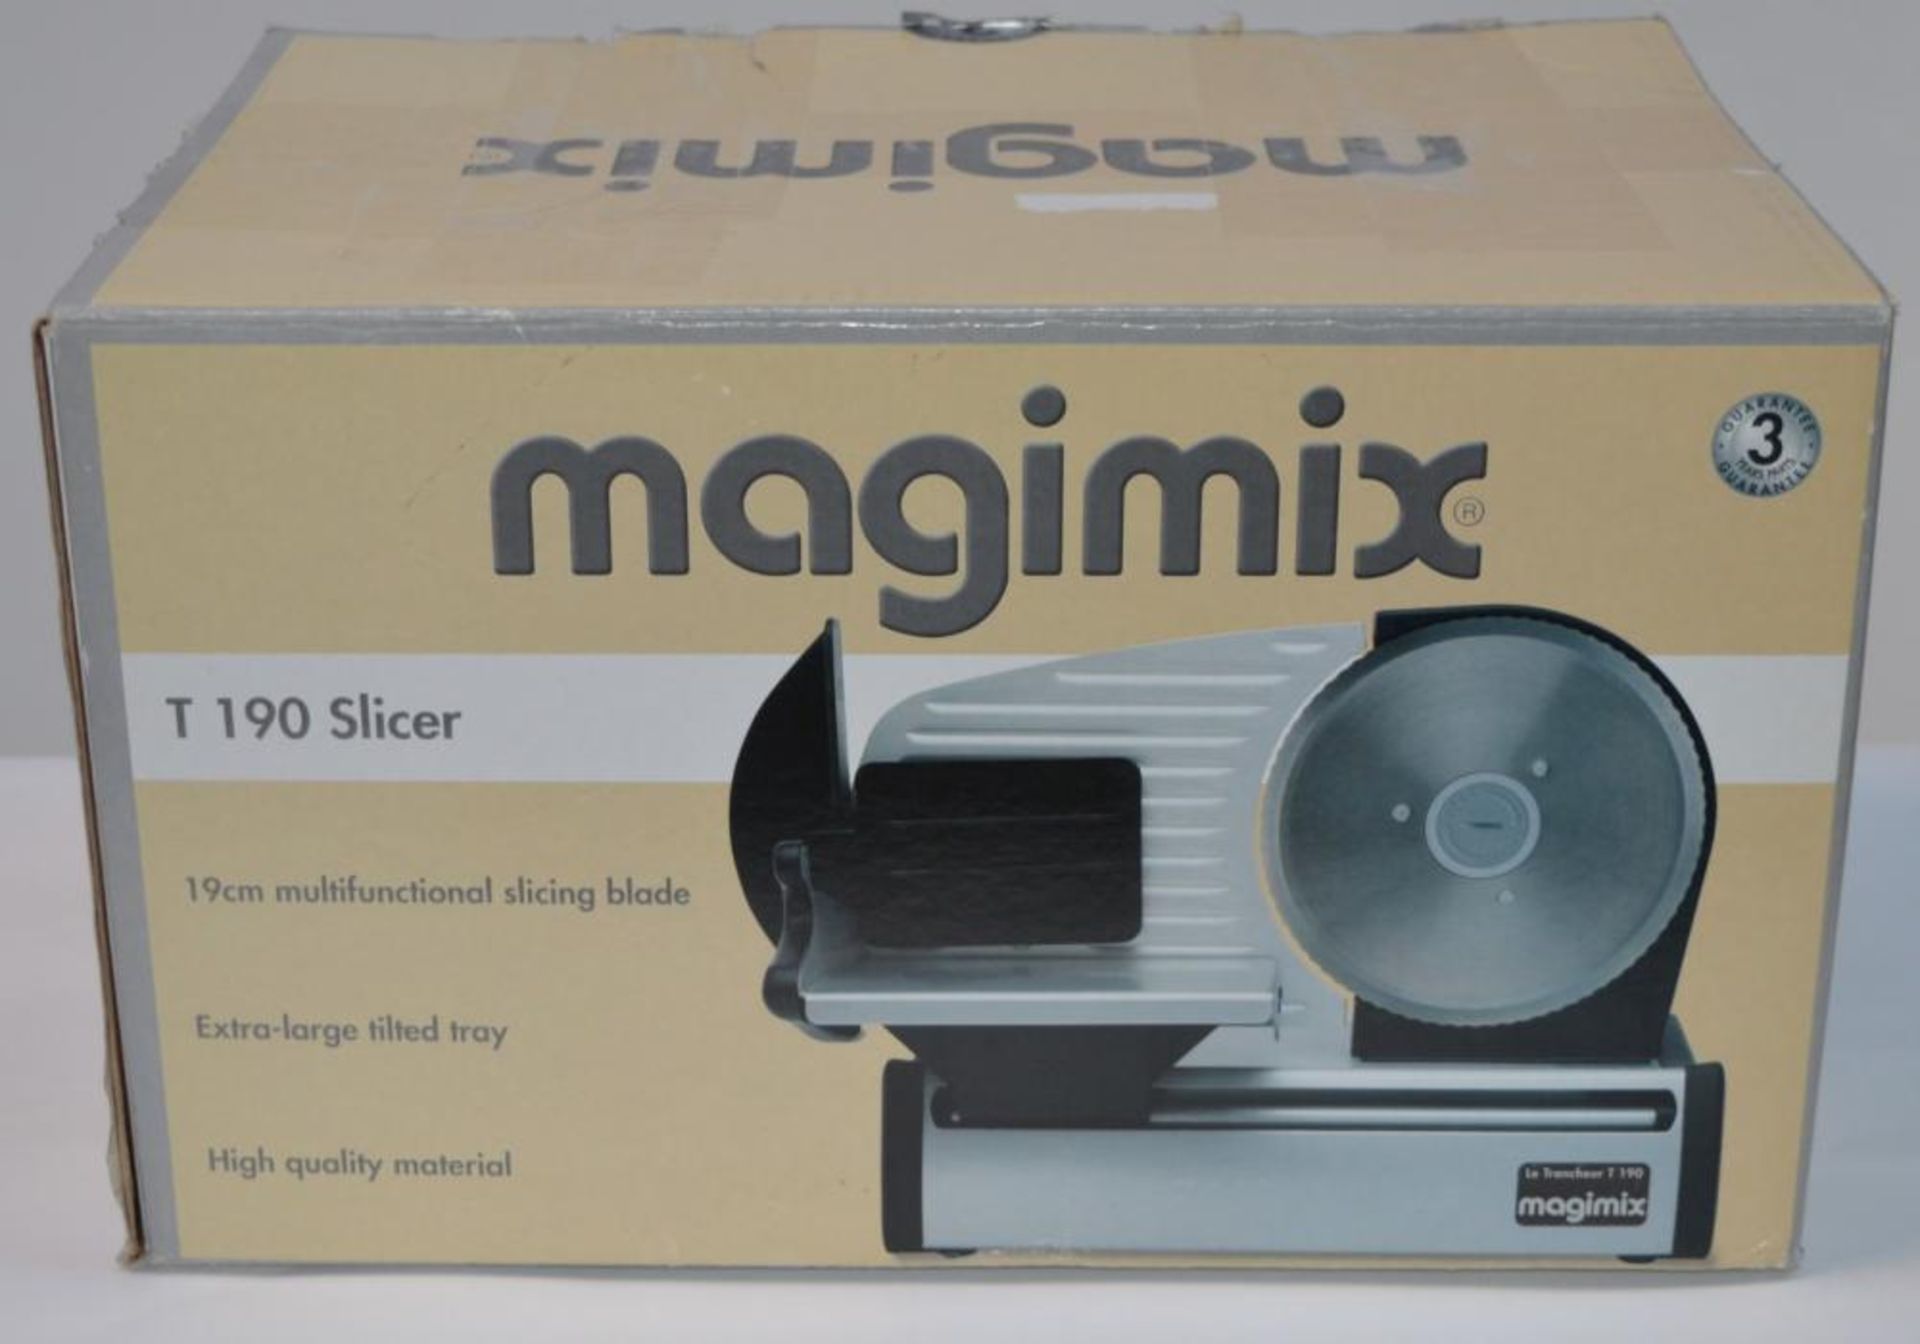 1 x Magimix 11650 T190 Stainless Steel Work Top Food Slicer - CL010 - Excellent Clean Condition - Id - Image 2 of 8